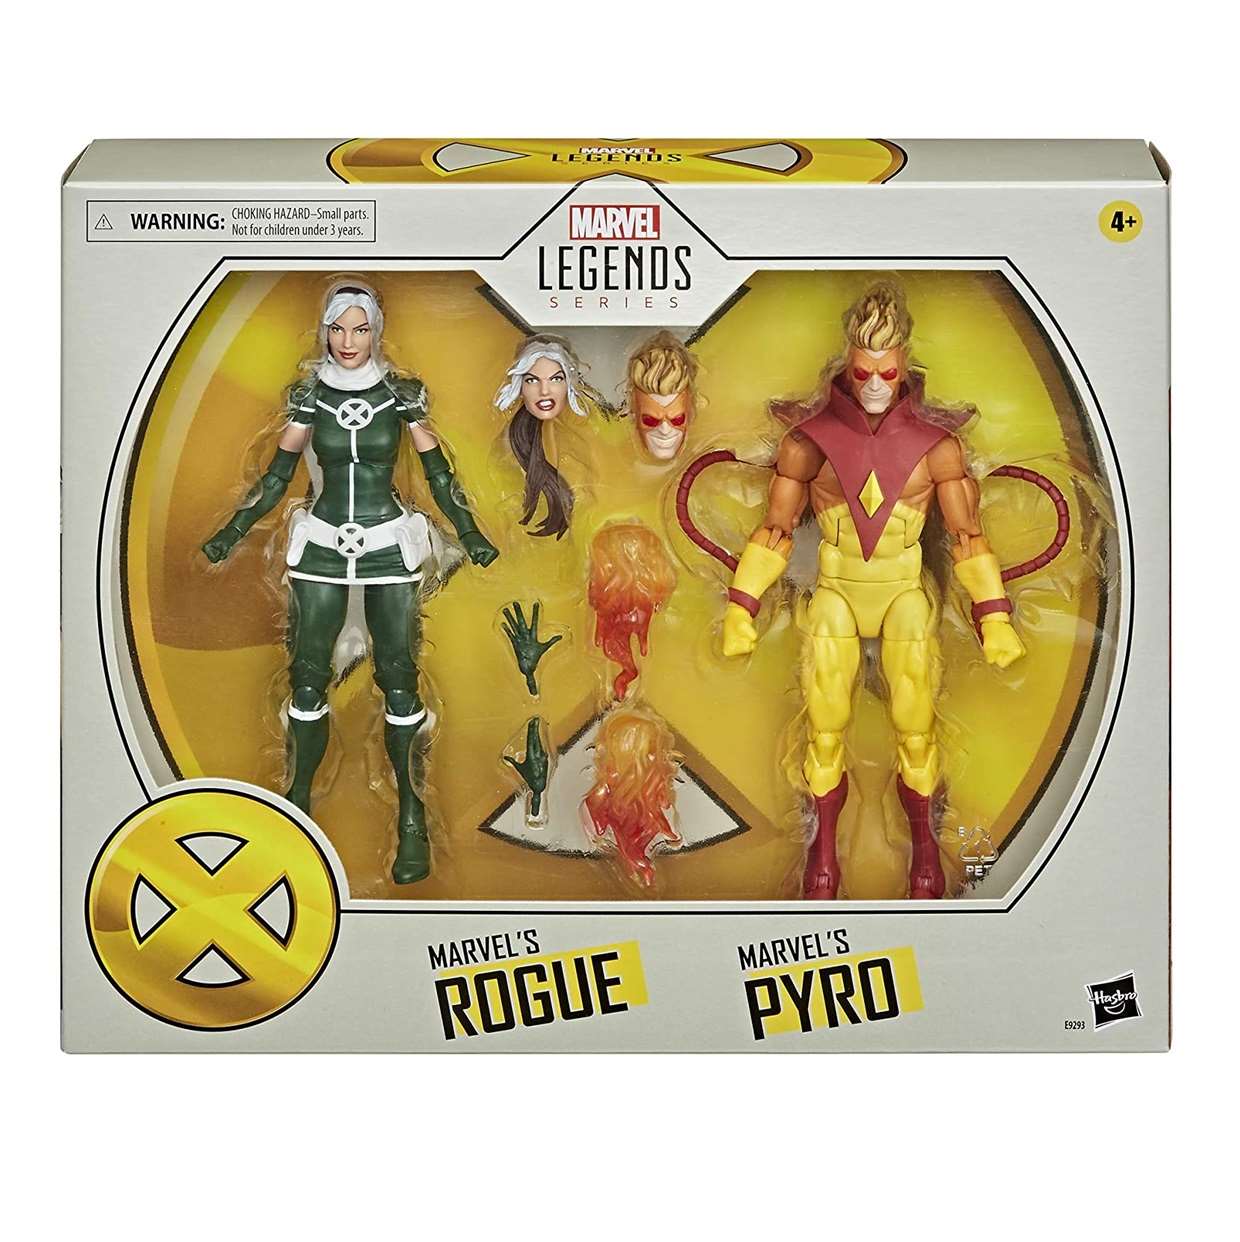 Pack Rogue And Pyro Figura X Men Legends Series 6 PuLG